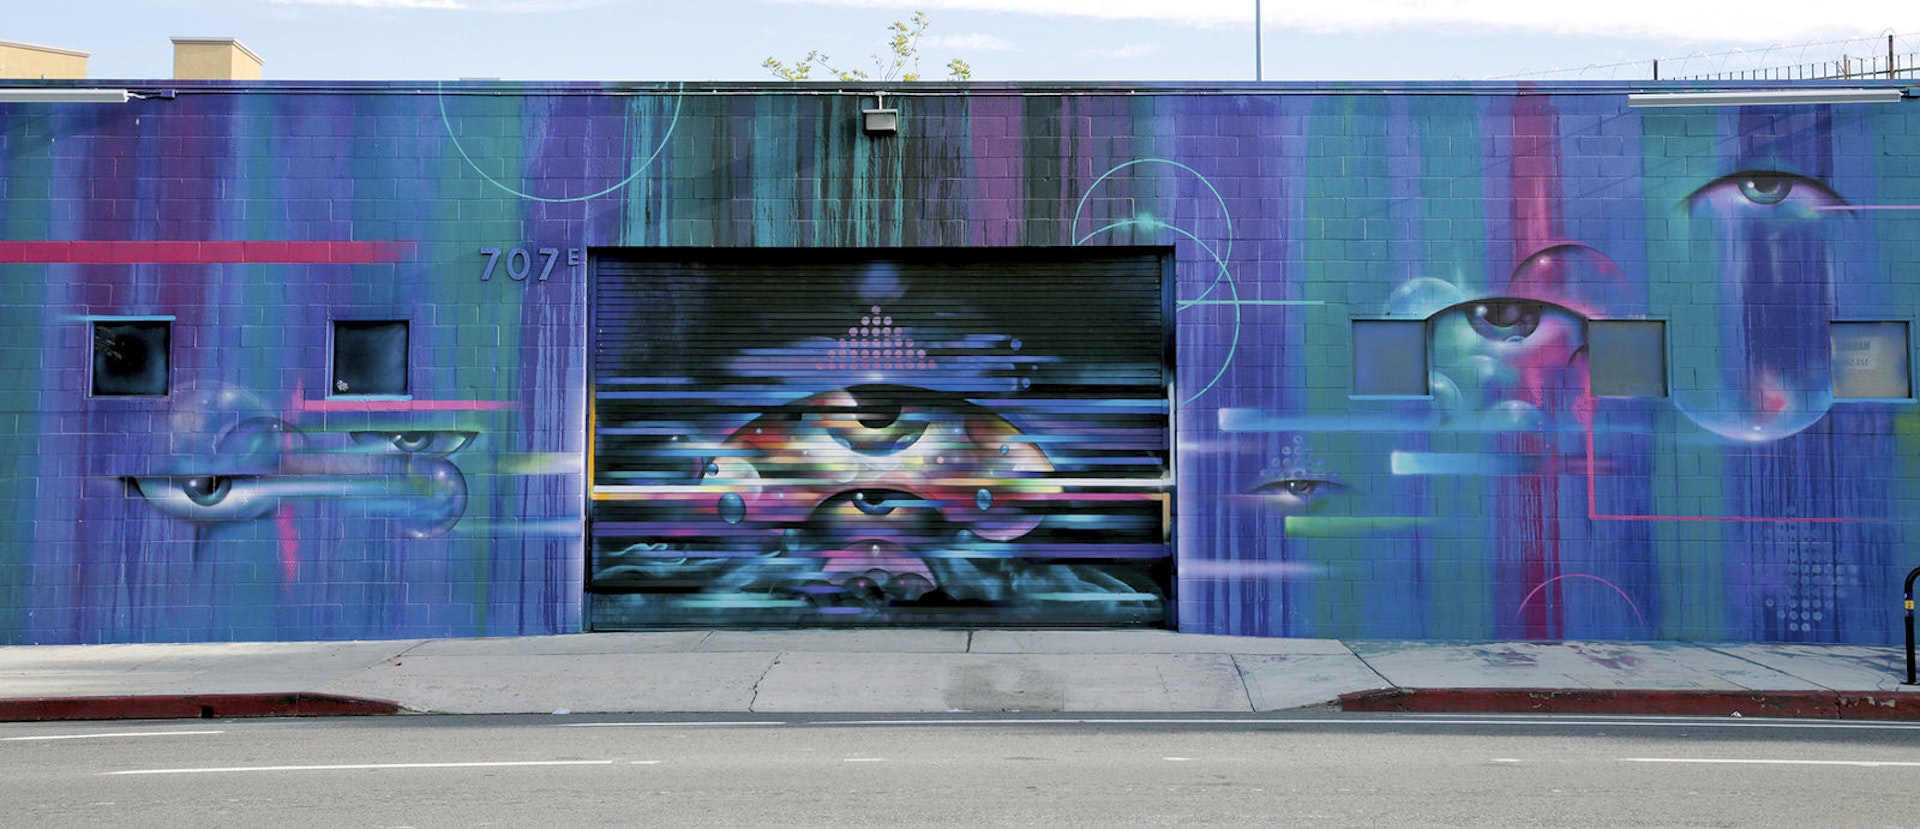 A blue and purple graffiti painting, with what appears to be an eye looking out at the viewer, decorates the outside of warehouse bar EightyTwo.